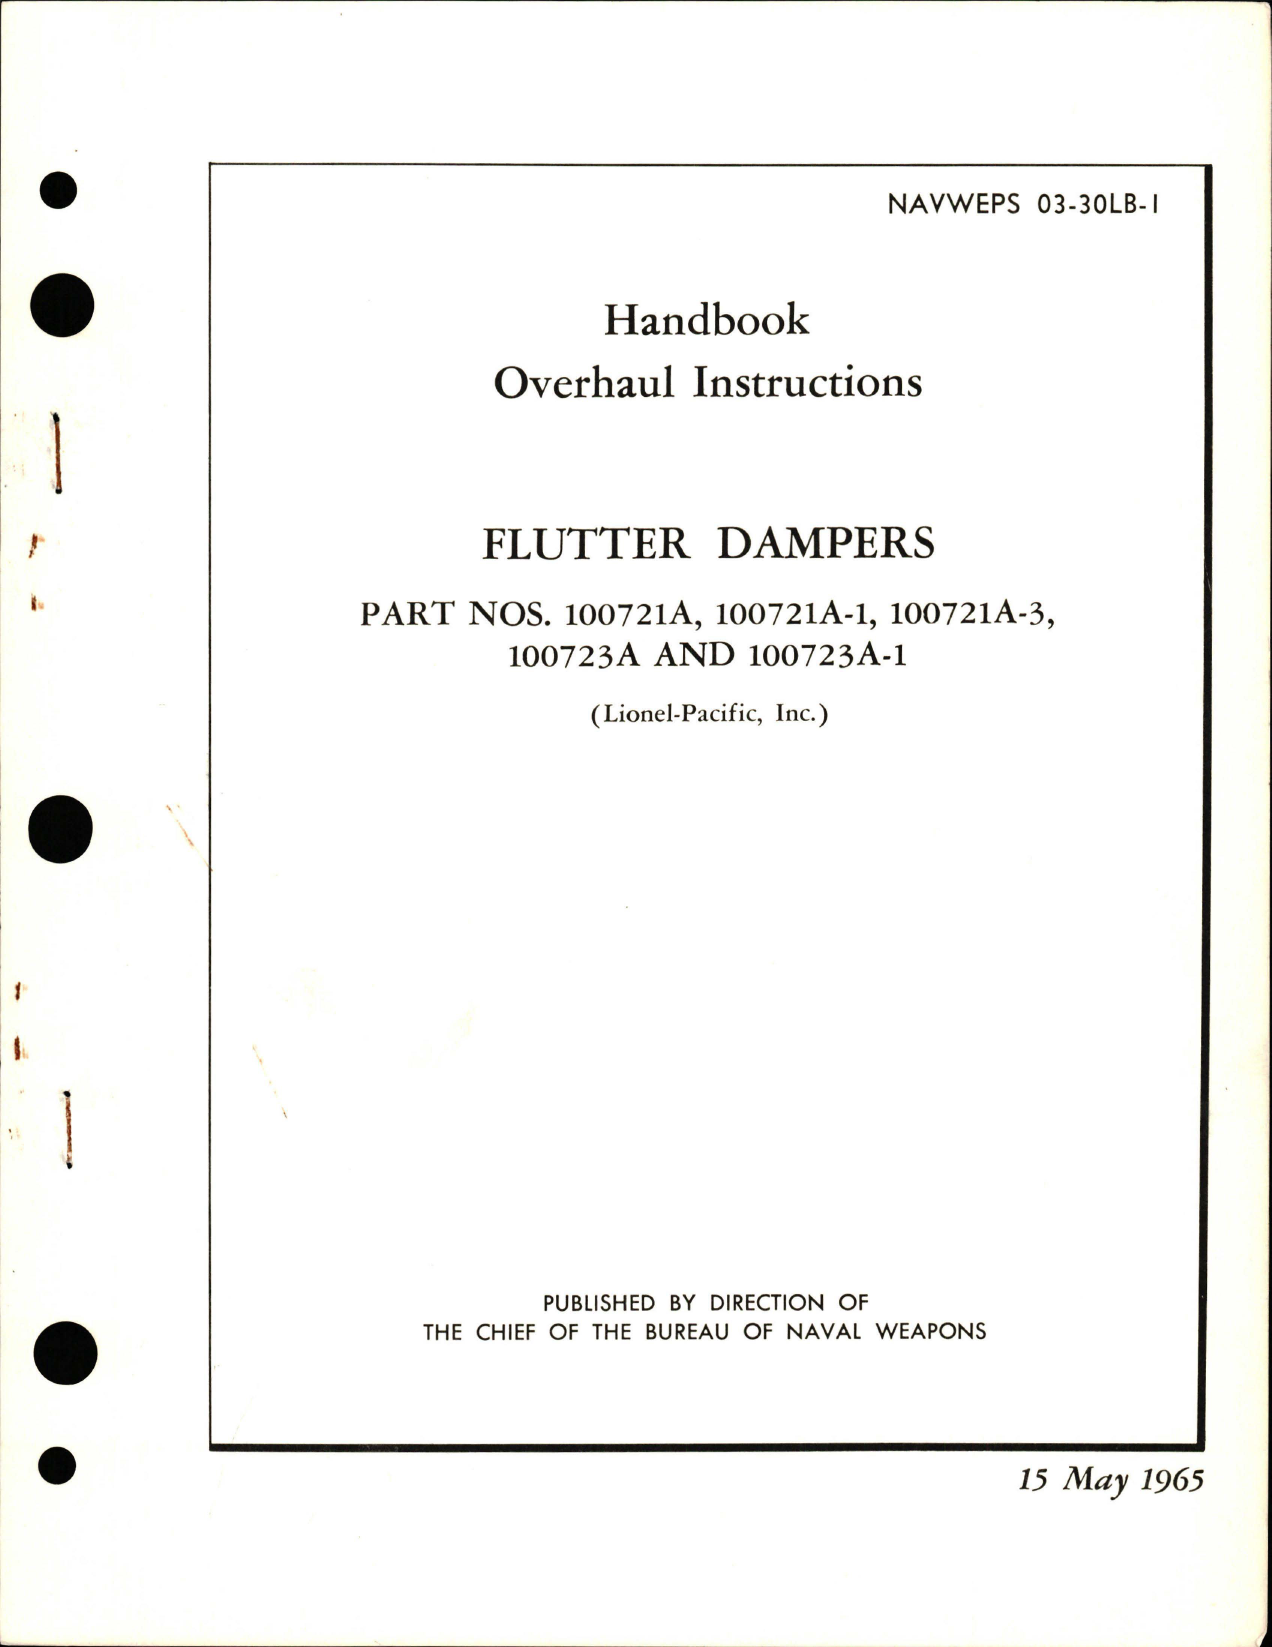 Sample page 1 from AirCorps Library document: Overhaul Instructions for Flutter Dampers - Parts 100721A, 100721A-1, 100721A-3, 100723A, and 100723A-1